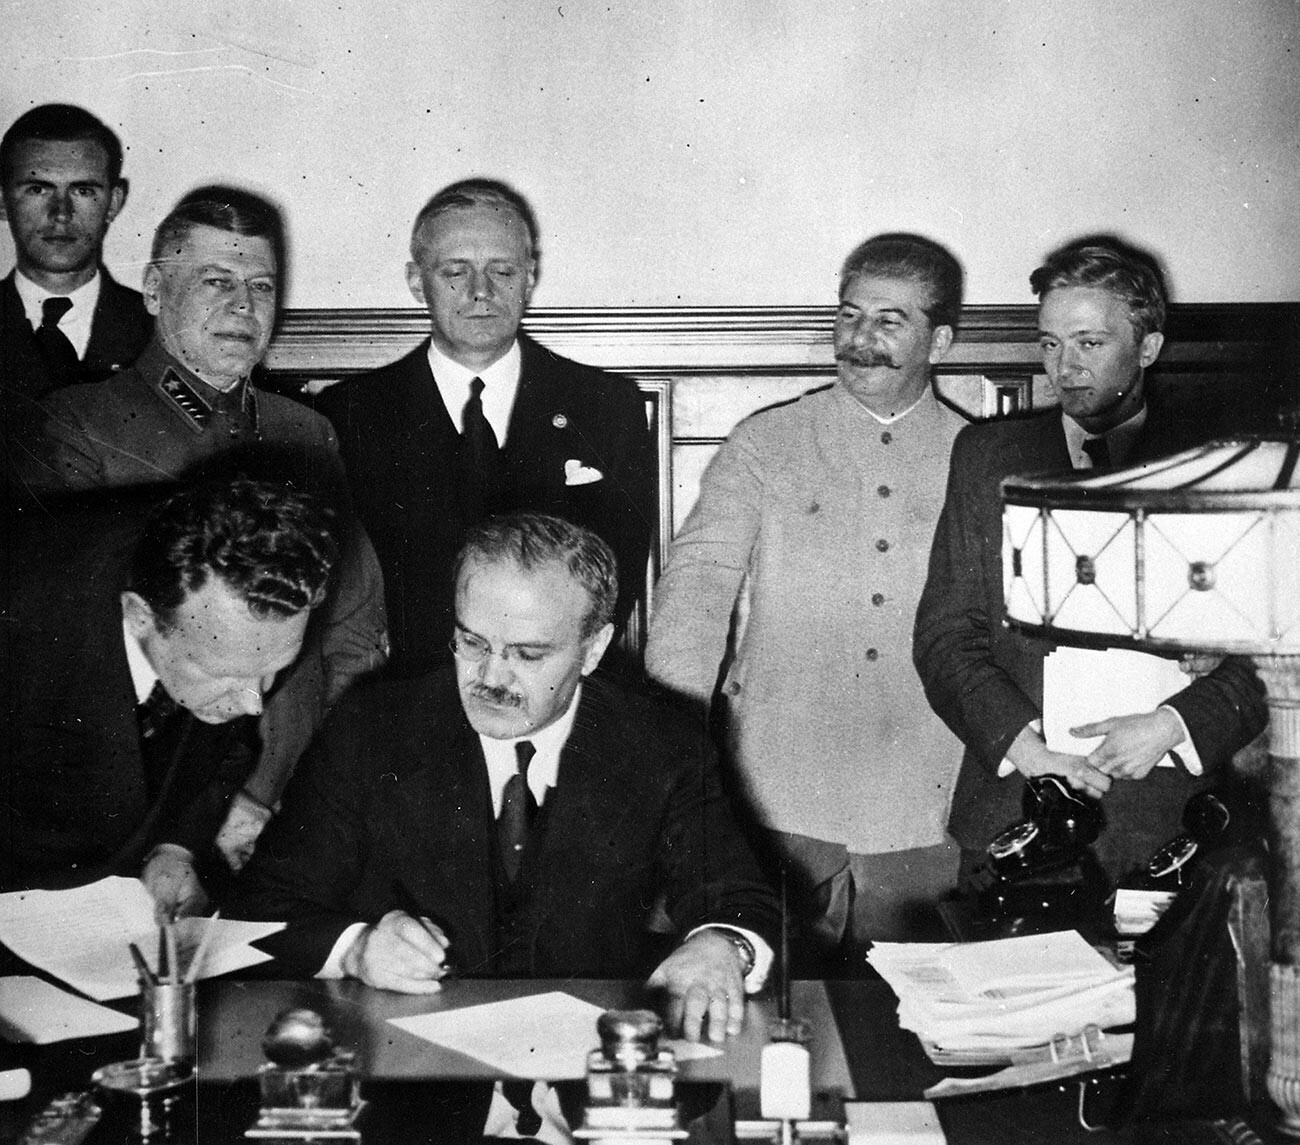 Russian Foreign Minister Vyacheslav Molotov with German Minister Von Ribbentrop and Josef Stalin.